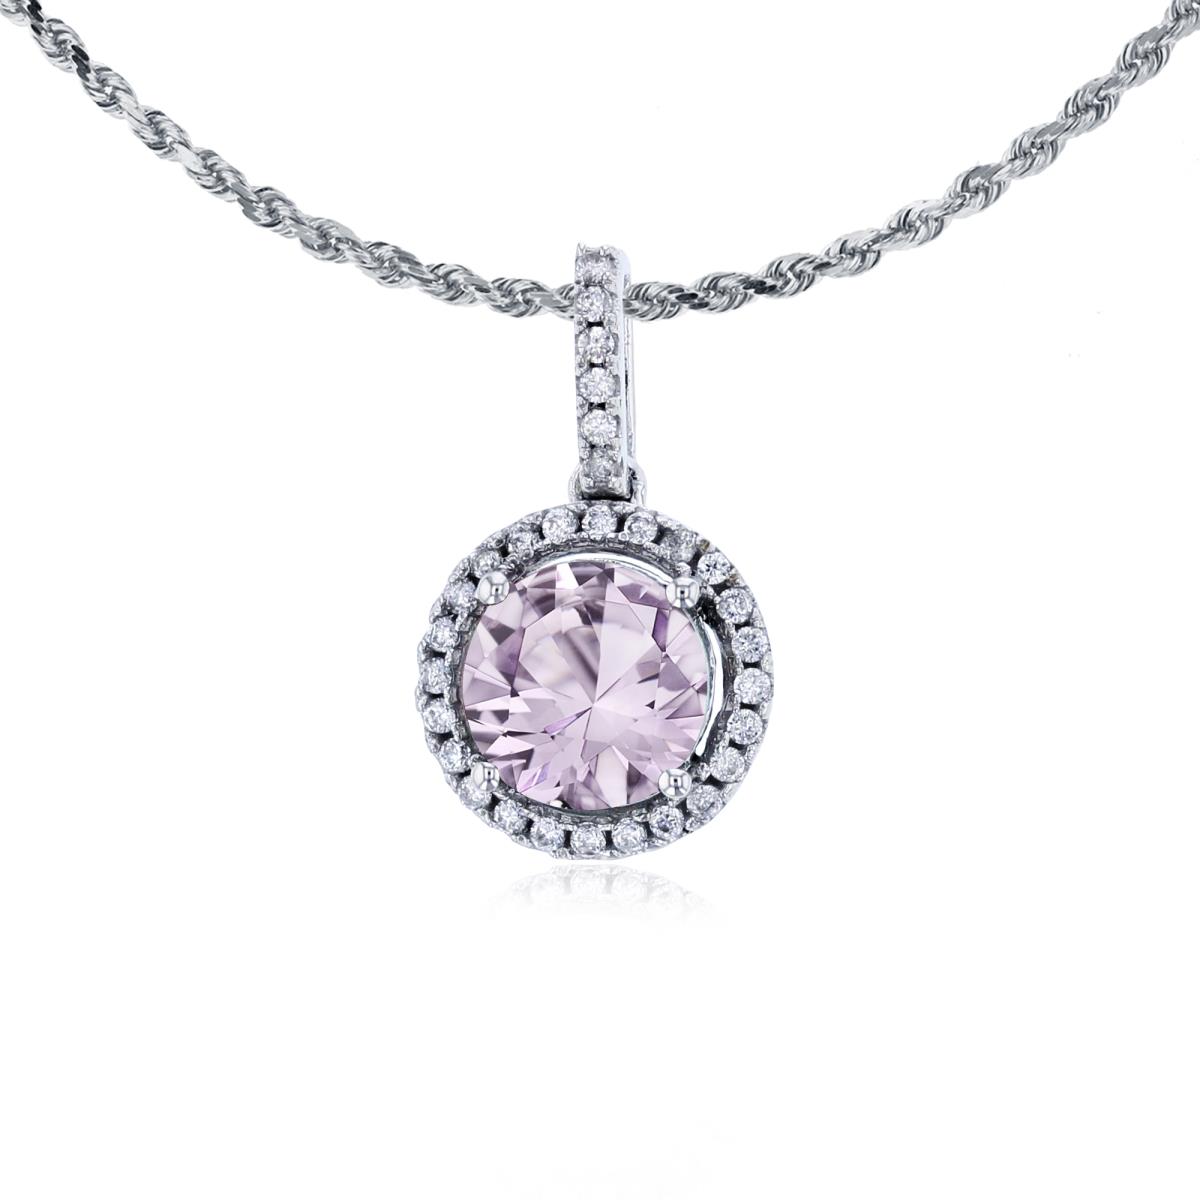 10K White Gold 7mm Round Rose De France & 0.15 CTTW Round Diamonds Halo 18" Rope Chain Necklace